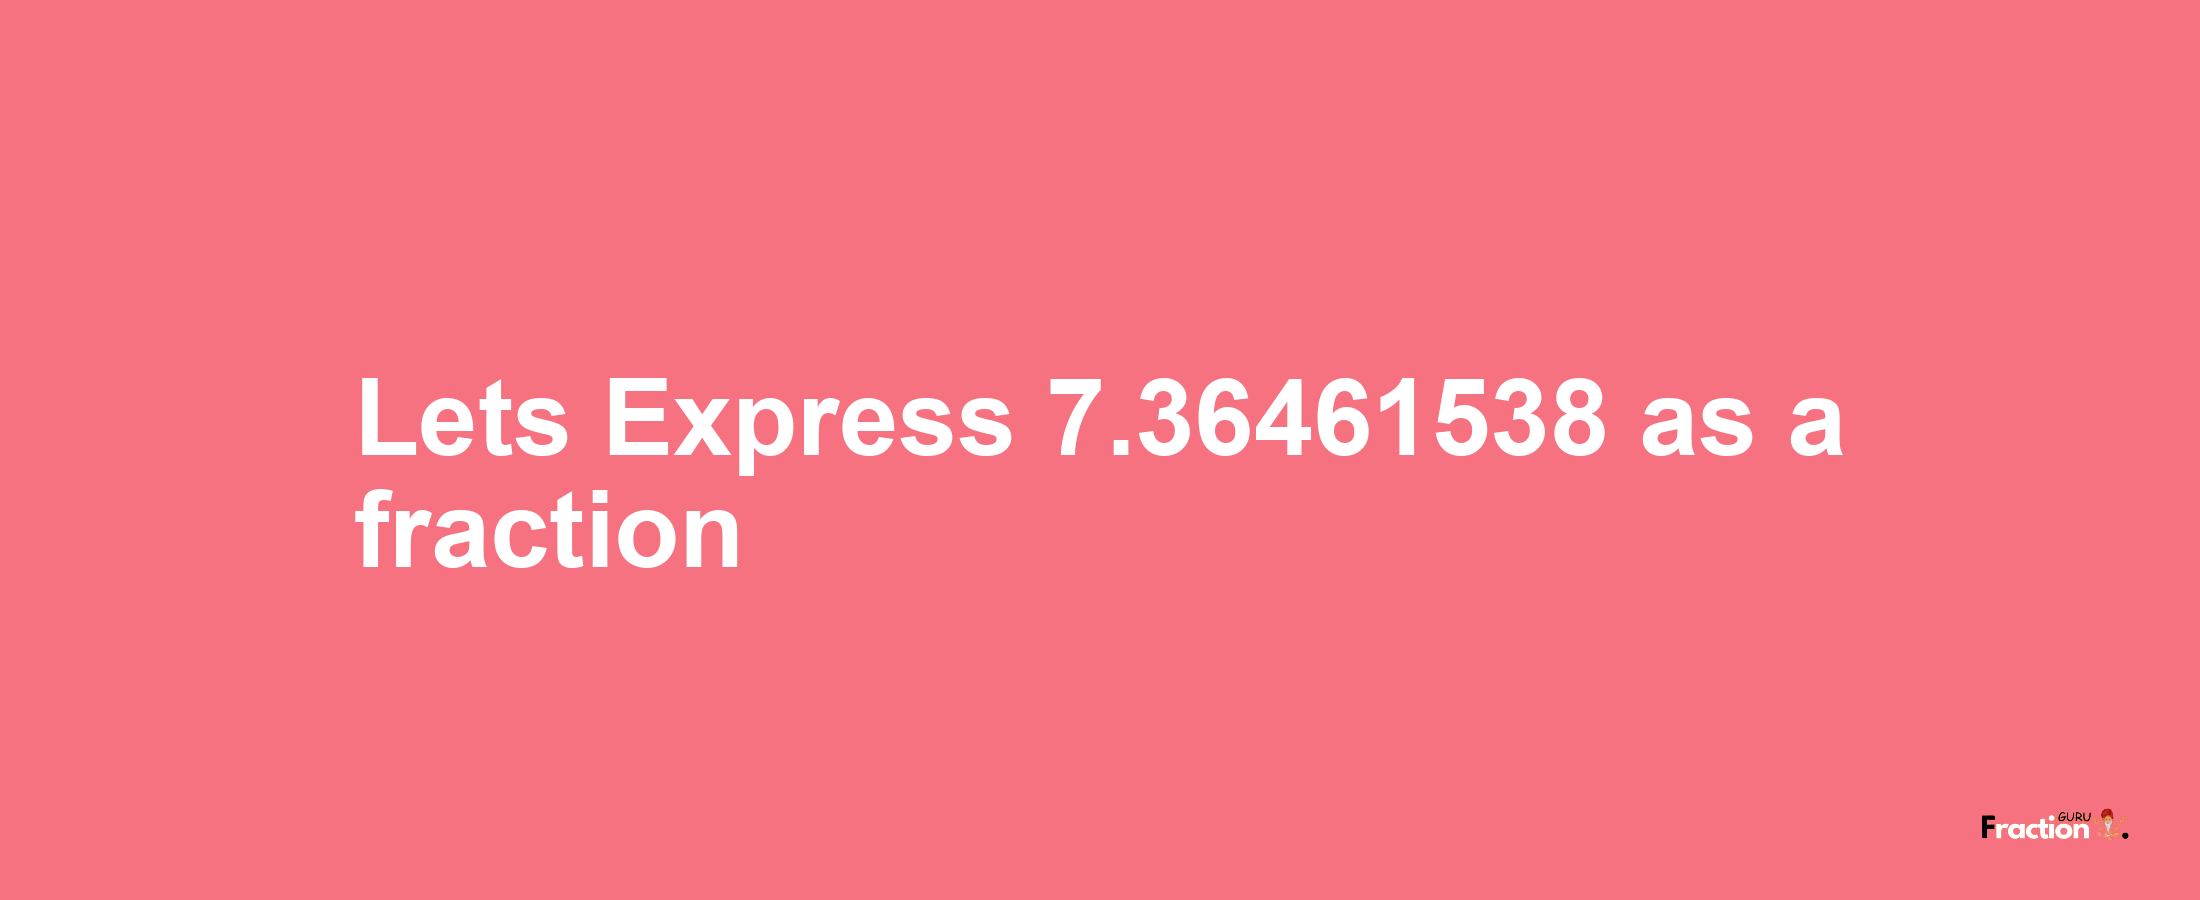 Lets Express 7.36461538 as afraction